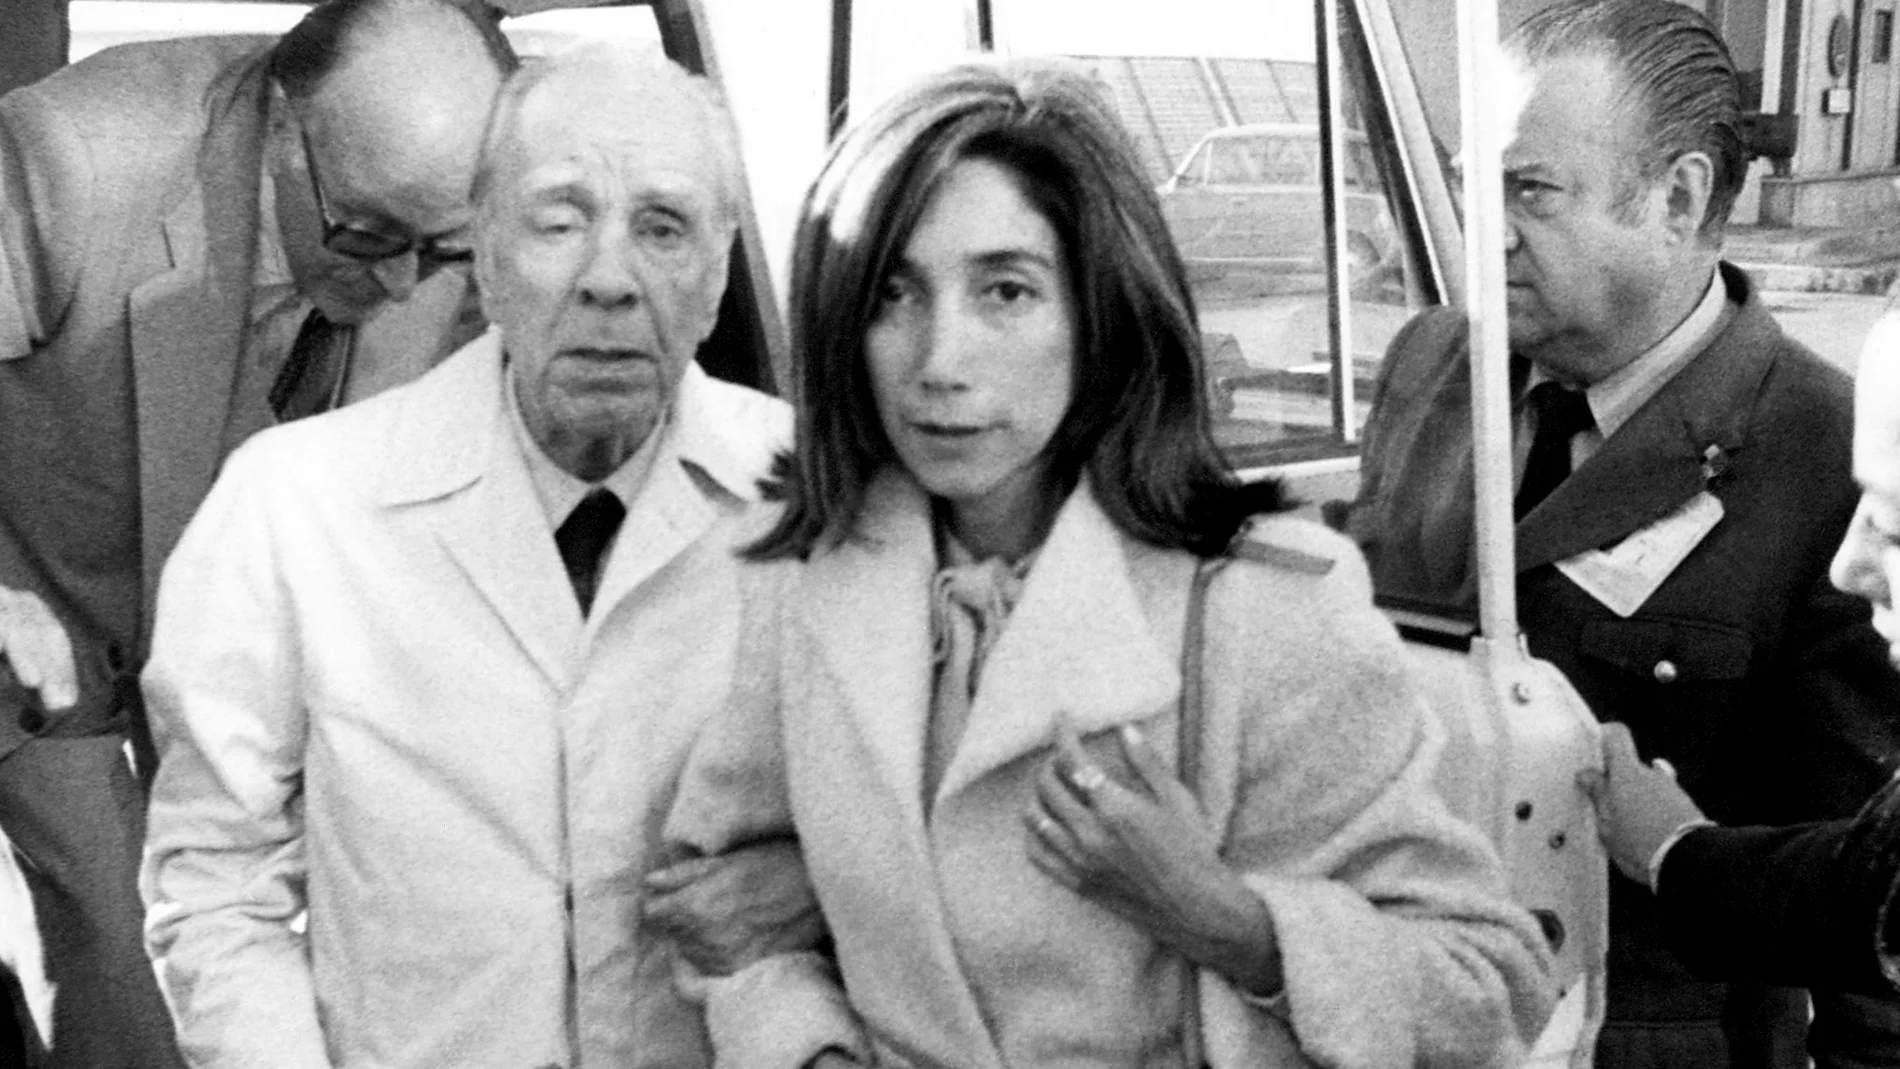 Argentine writer Jorge Luis Borges, accompanied by his secretary Maria Kodama, arrives in Madrid, Spain to receive the Spanish literary prize "Miguel de Cervantes."